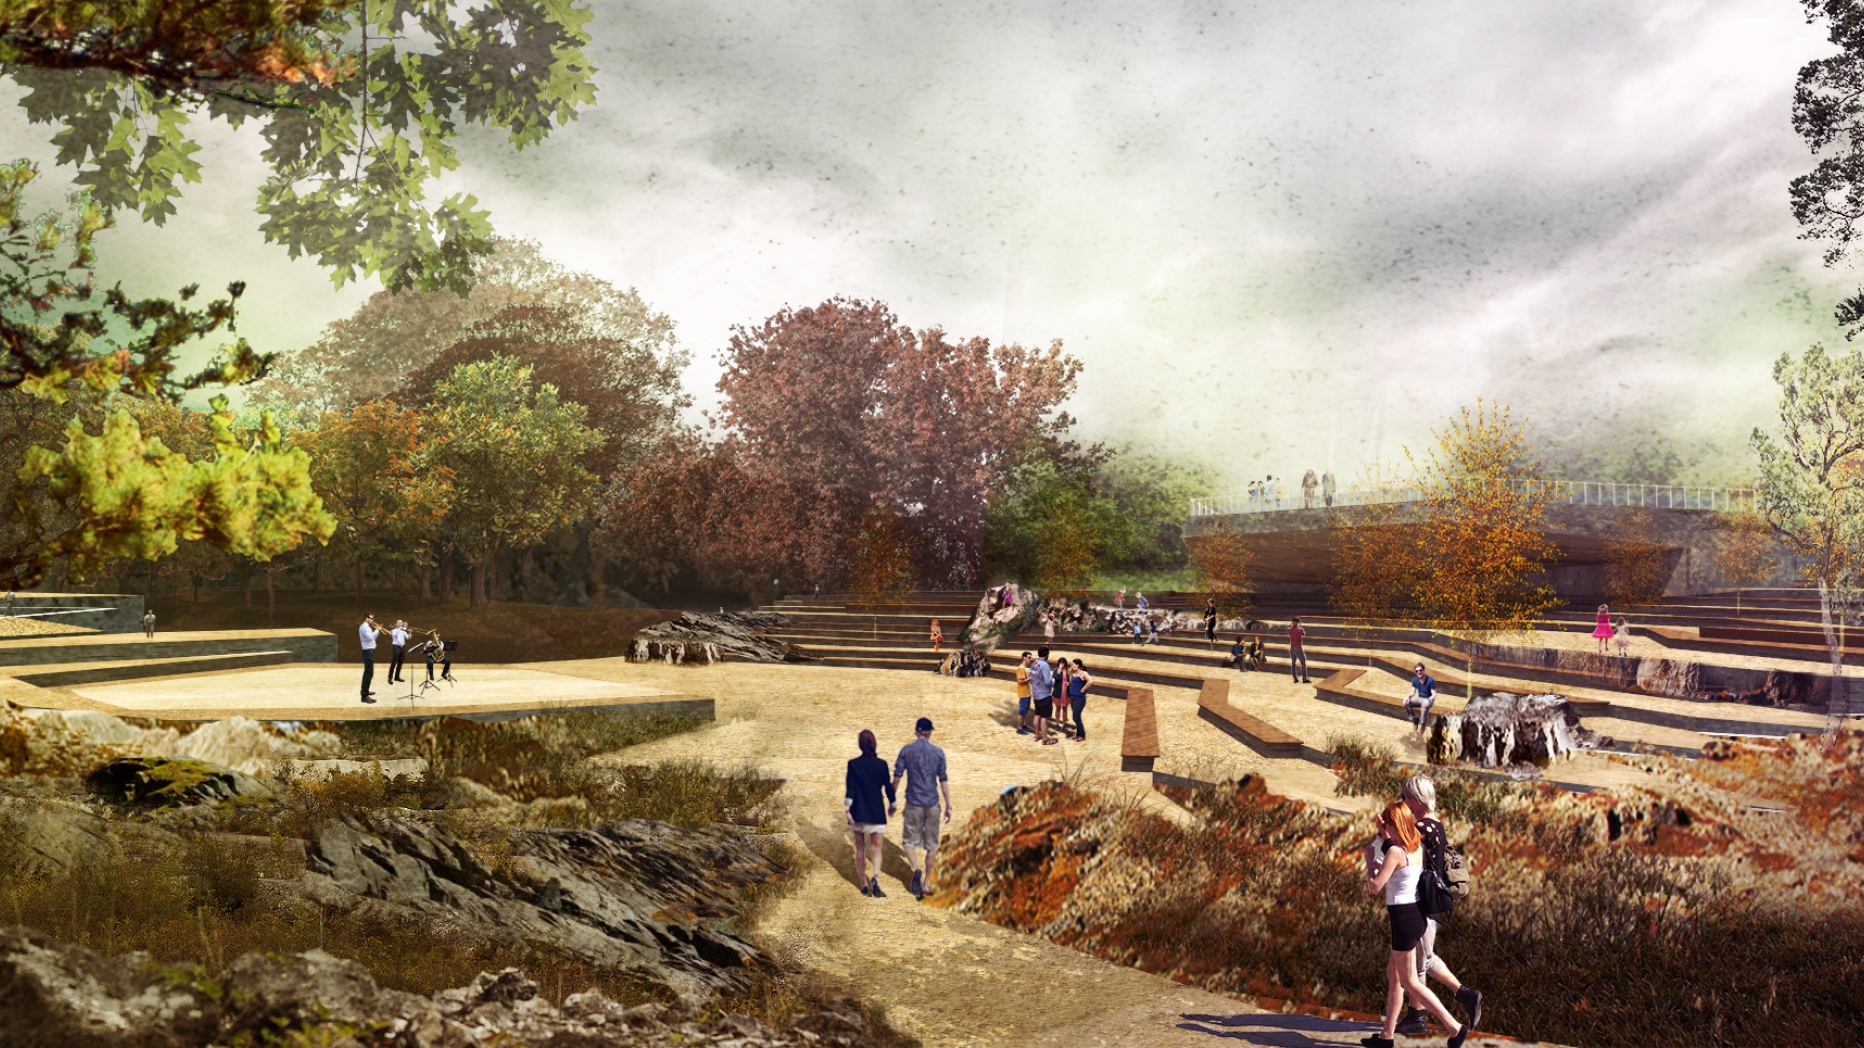  Rendering of amphitheater in park with band playing and people casually strolling through